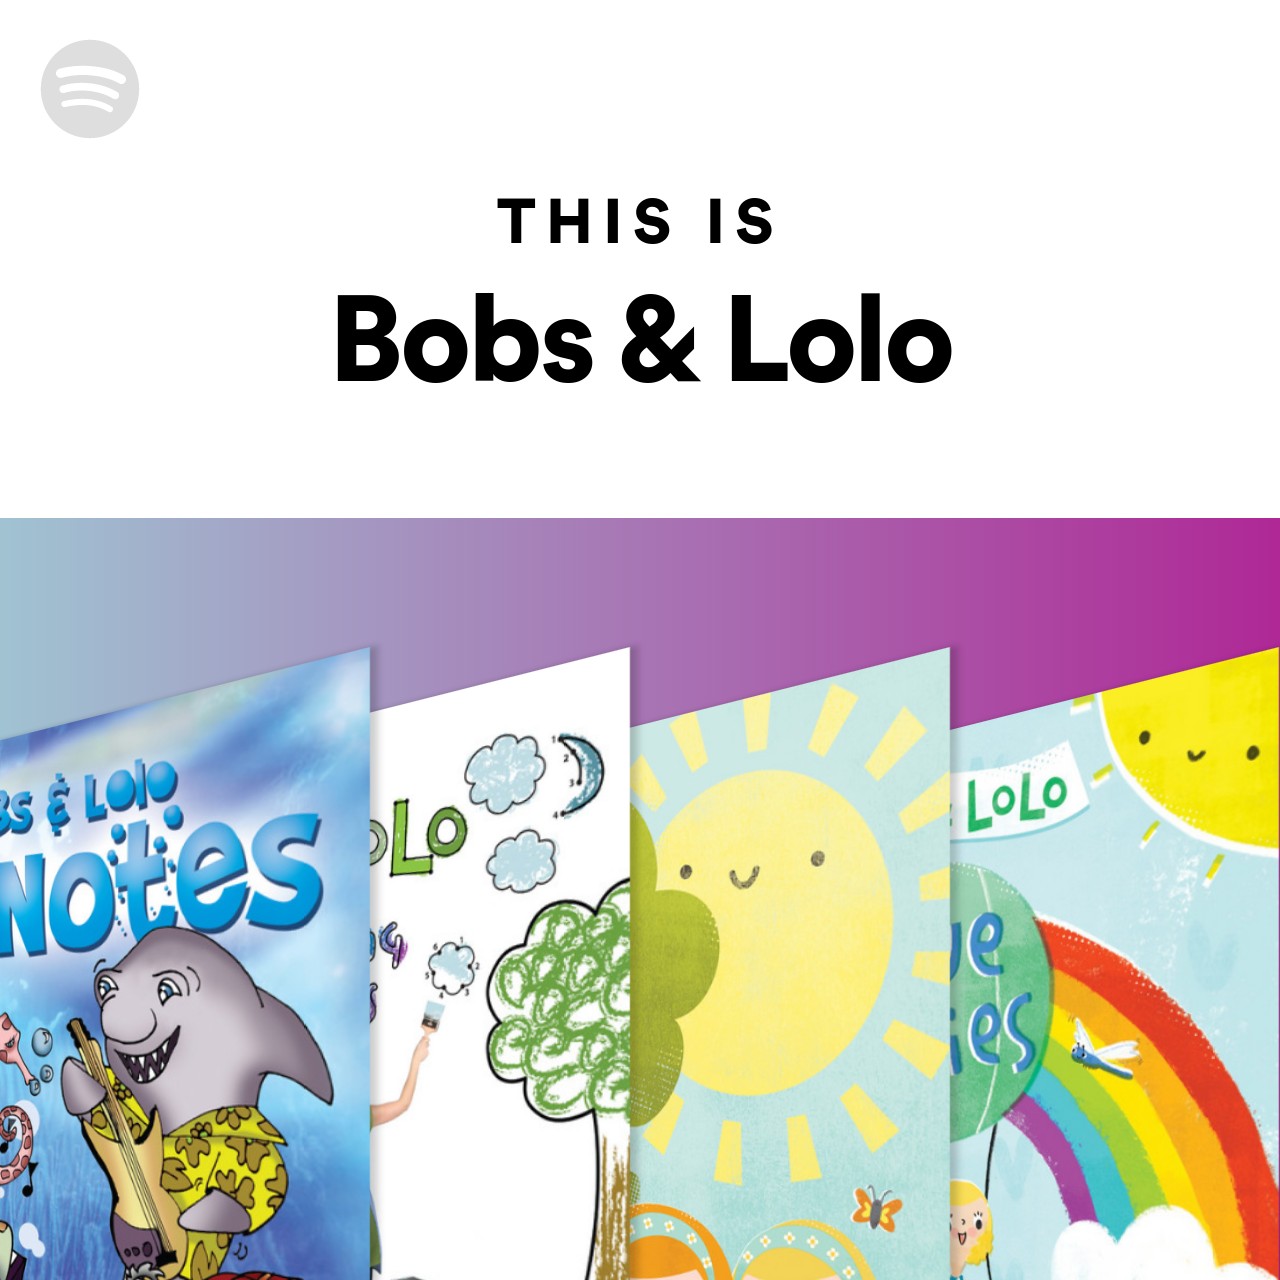 This Is Bobs & Lolo